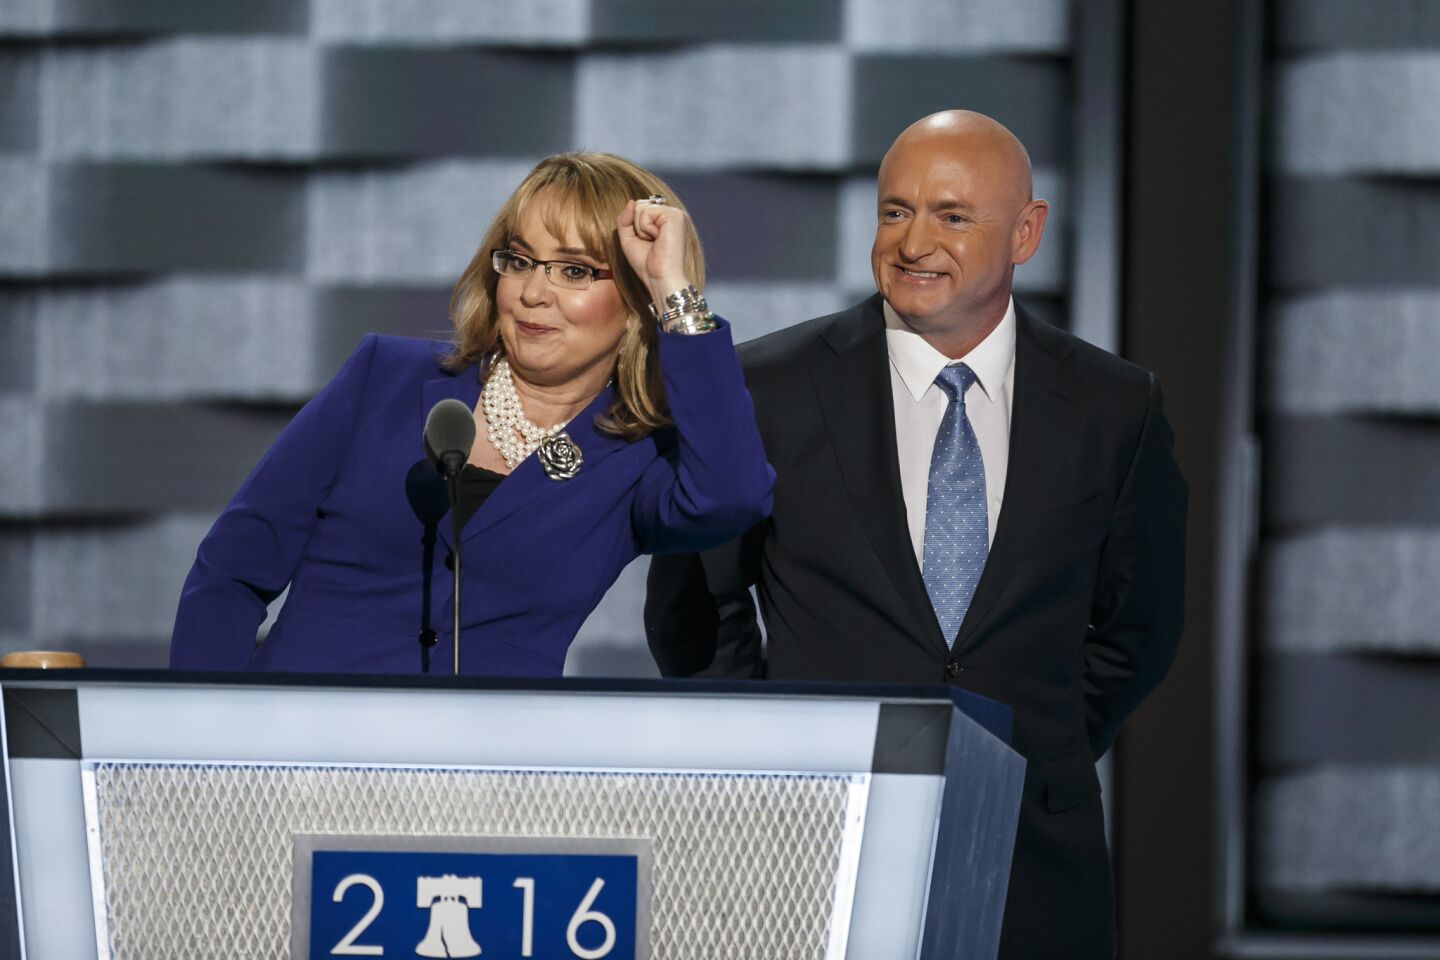 PHILADELPHIA, PA. -- WEDNESDAY, JULY 27, 2016: Gabby Giffords and Mark Kelly speak at the 2016 Democratic National Convention.